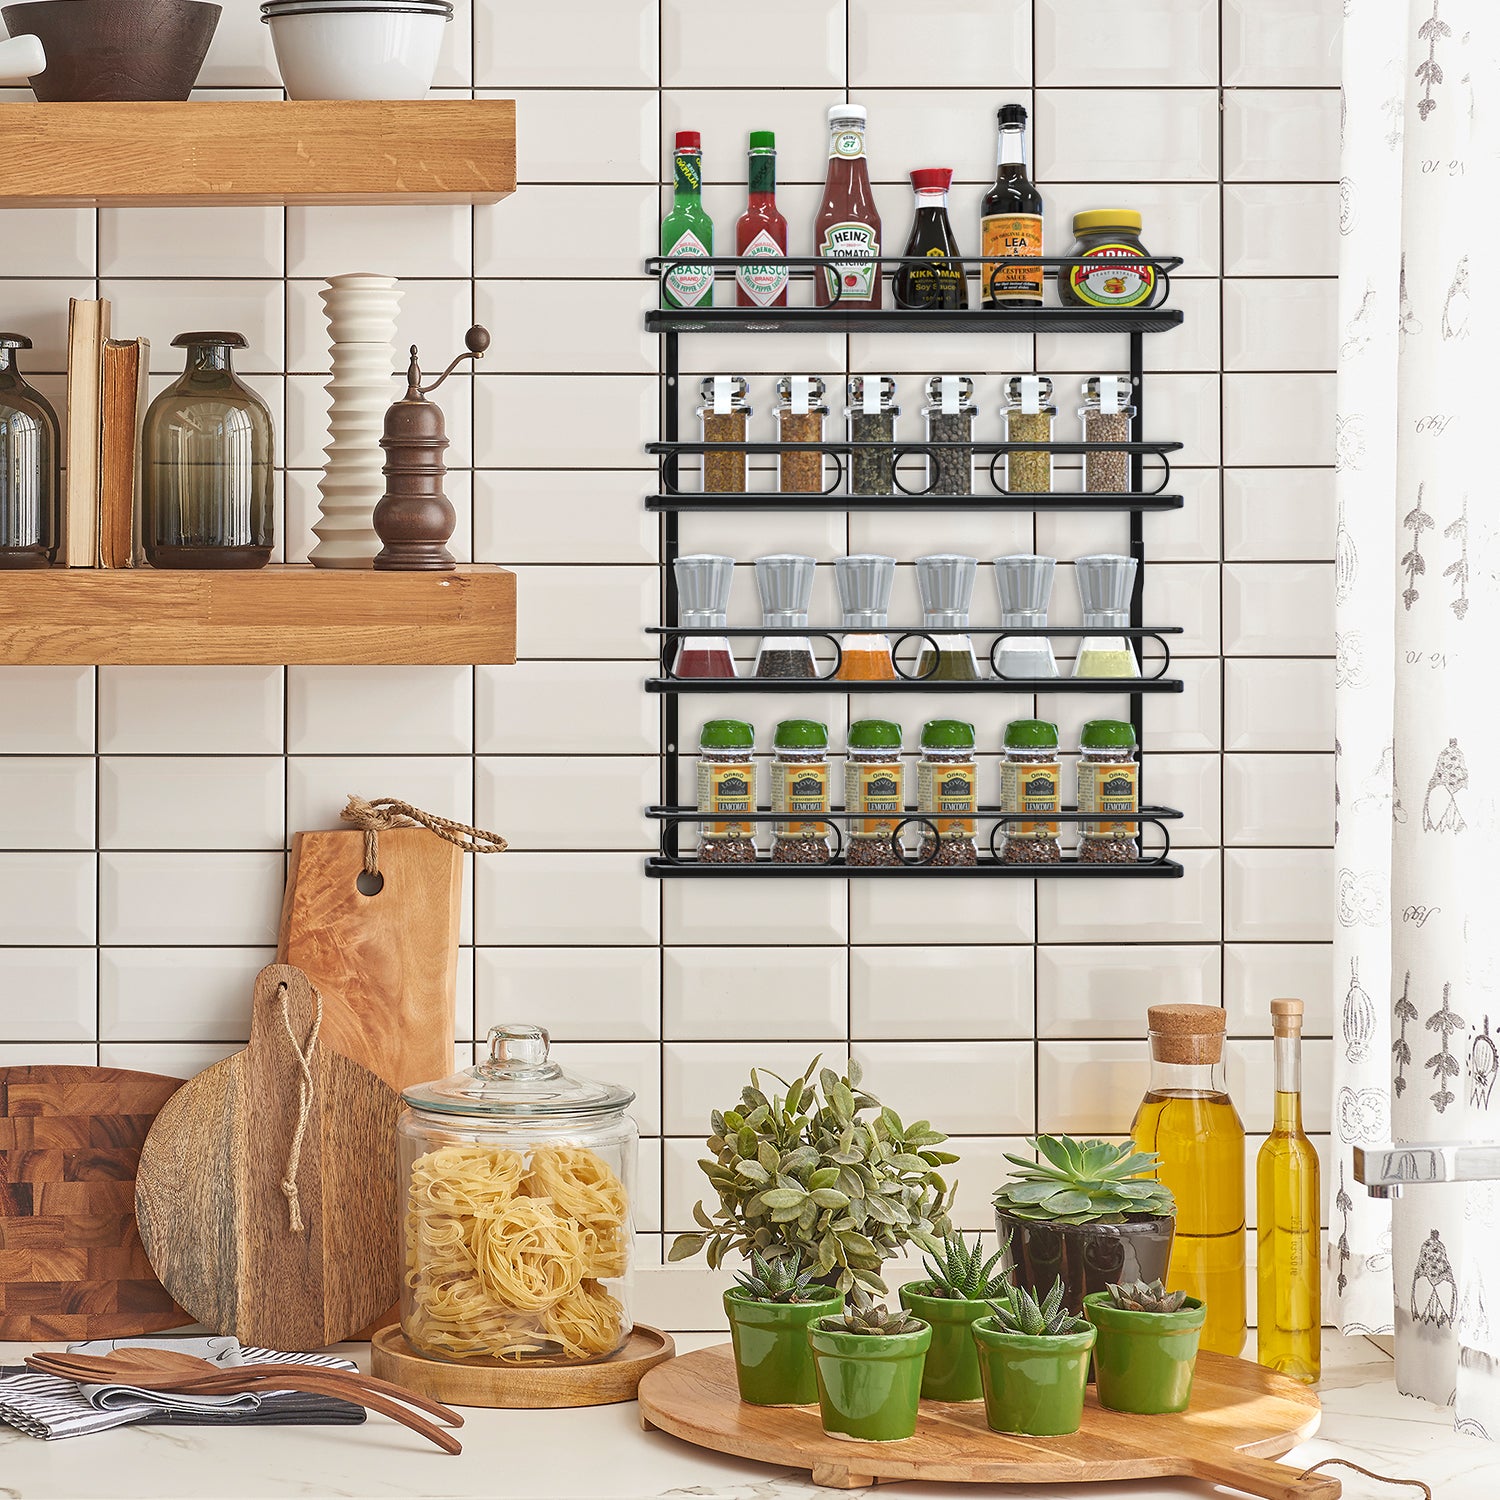 Farmhouse Style Hanging Spice Racks for Wall Mount - Easy to Install Set of 4 Space Saving Racks - The Ideal Seasoning Organizer for Your Kitchen